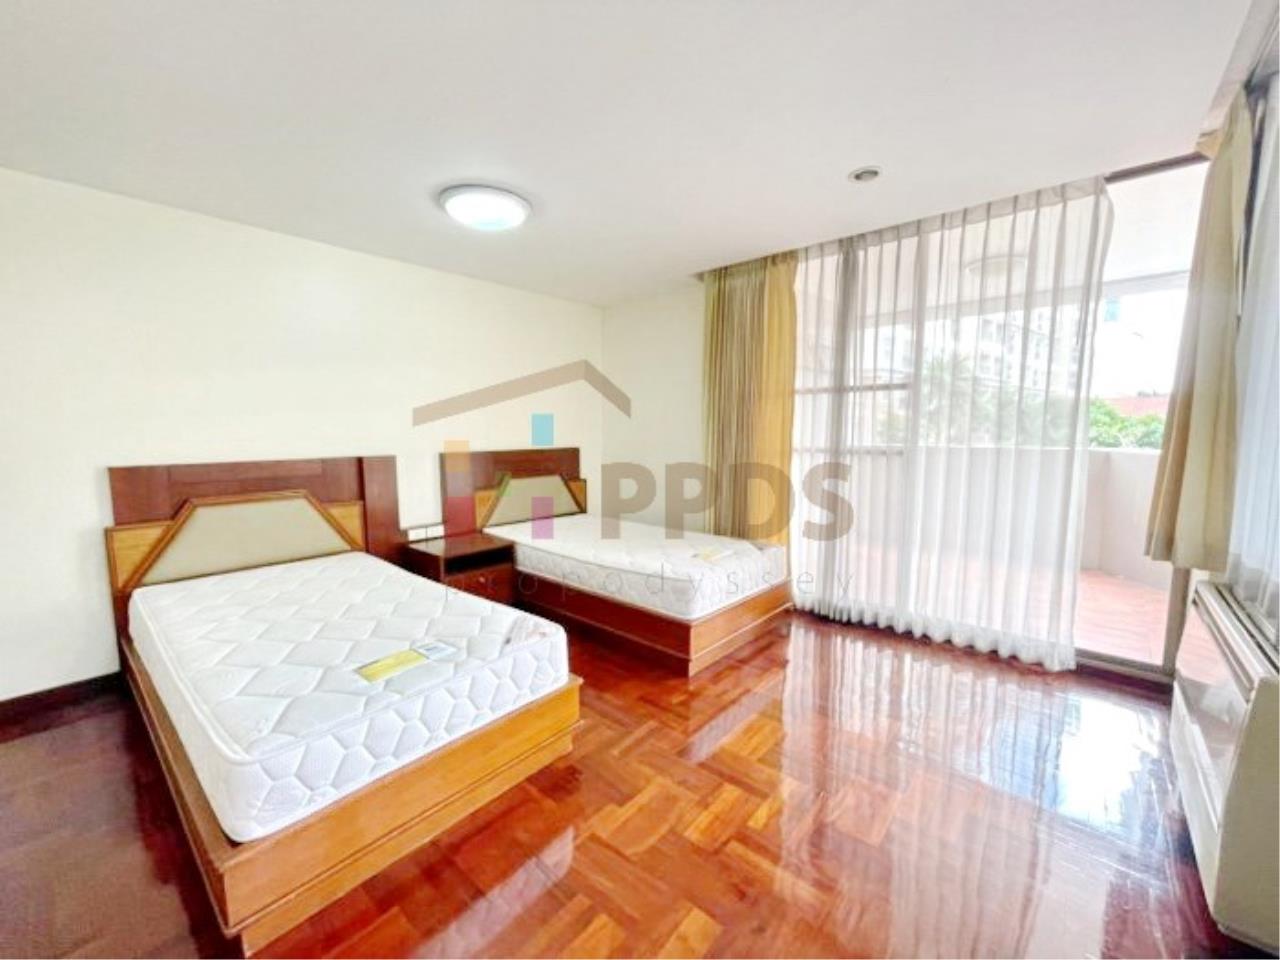 Propodyssey Agency's 3 Bedrooms for rent with big balcony in Sukhumvit soi 24 8